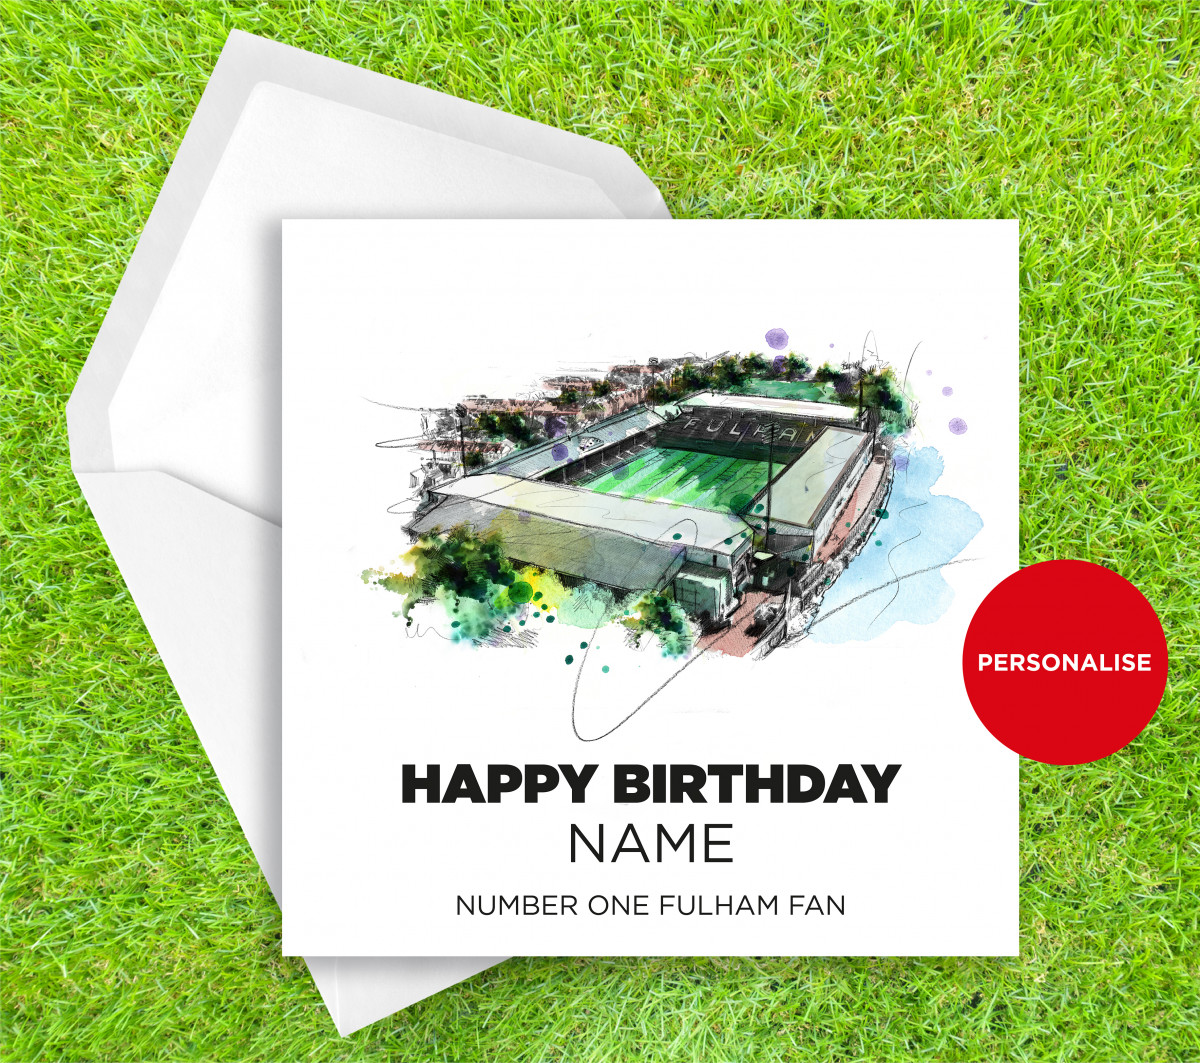 Fulham, Craven Cottage, personalised birthday card